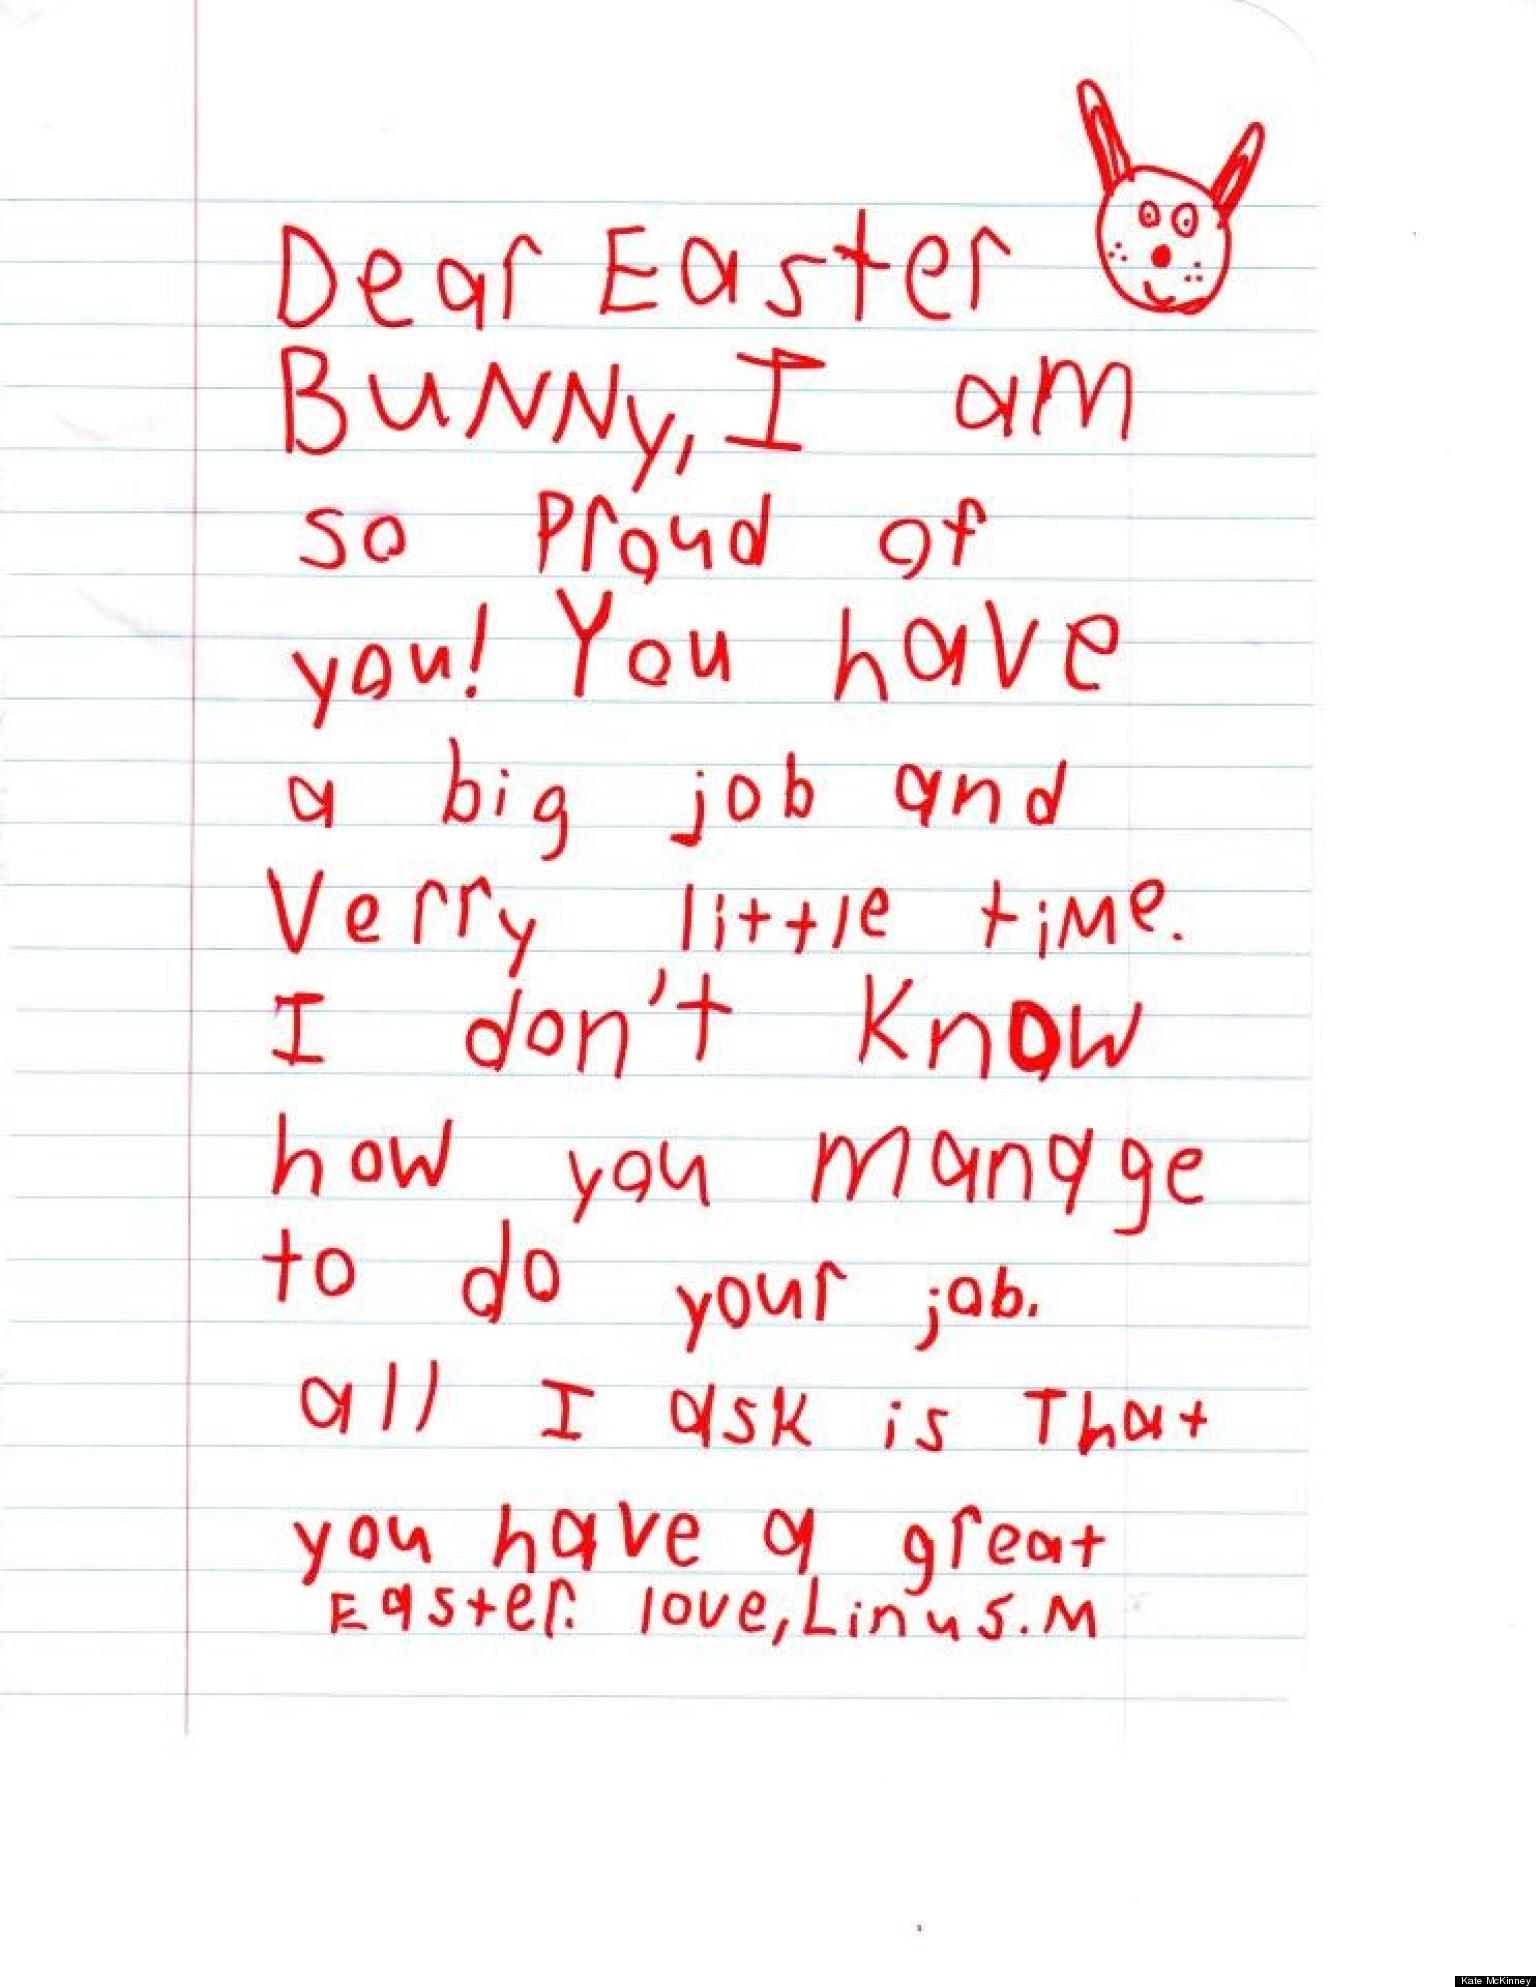 cute-kid-note-of-the-day-dear-easter-bunny-huffpost